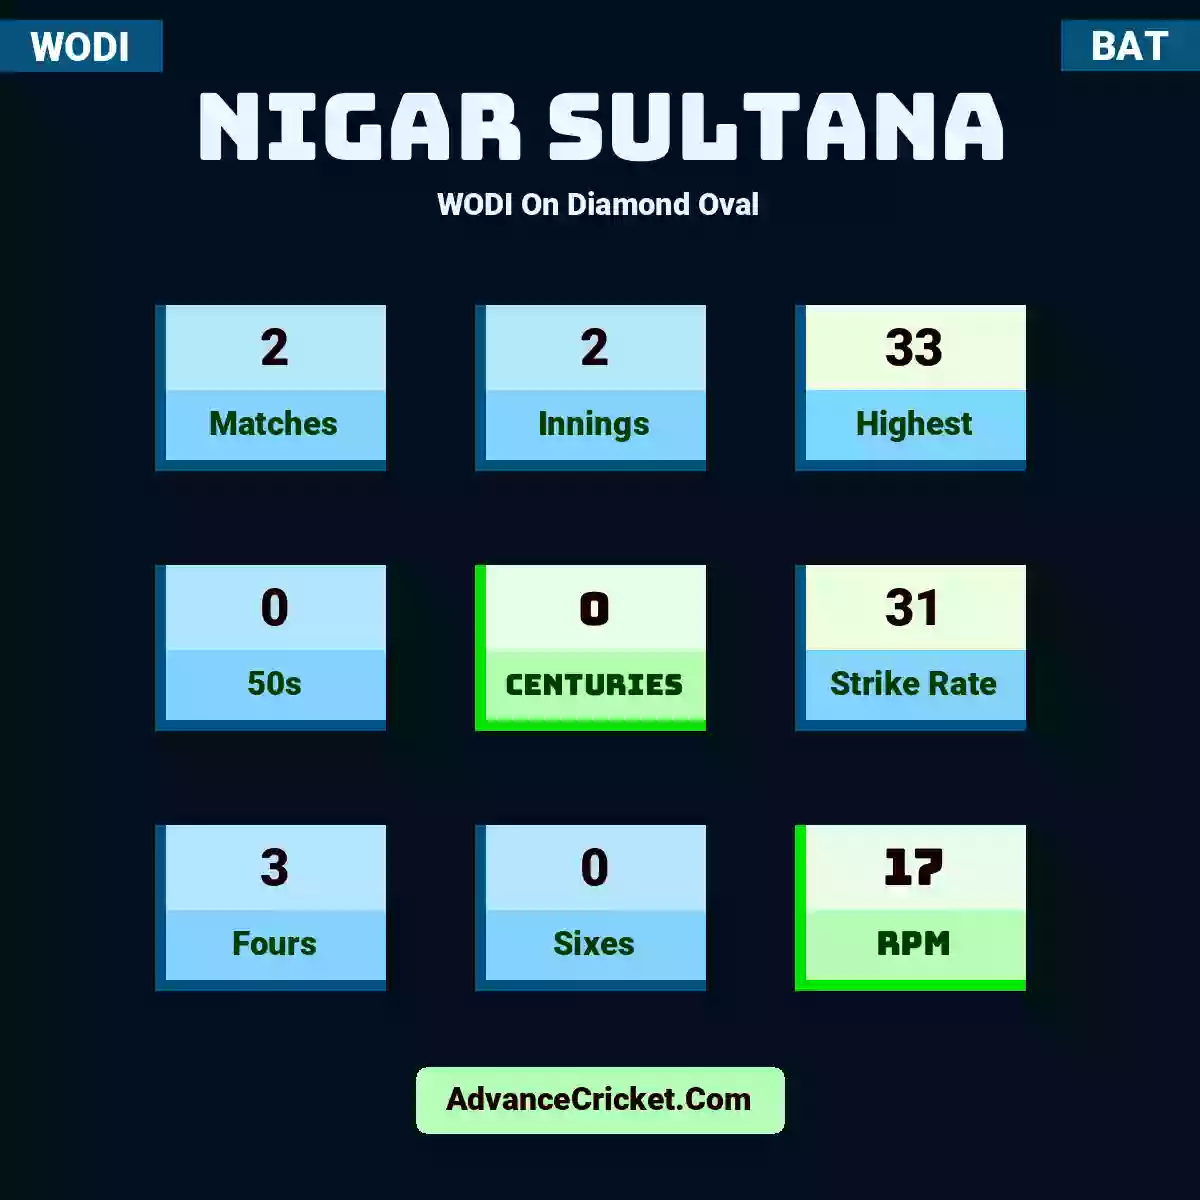 Nigar Sultana WODI  On Diamond Oval, Nigar Sultana played 2 matches, scored 33 runs as highest, 0 half-centuries, and 0 centuries, with a strike rate of 31. N.Sultana hit 3 fours and 0 sixes, with an RPM of 17.